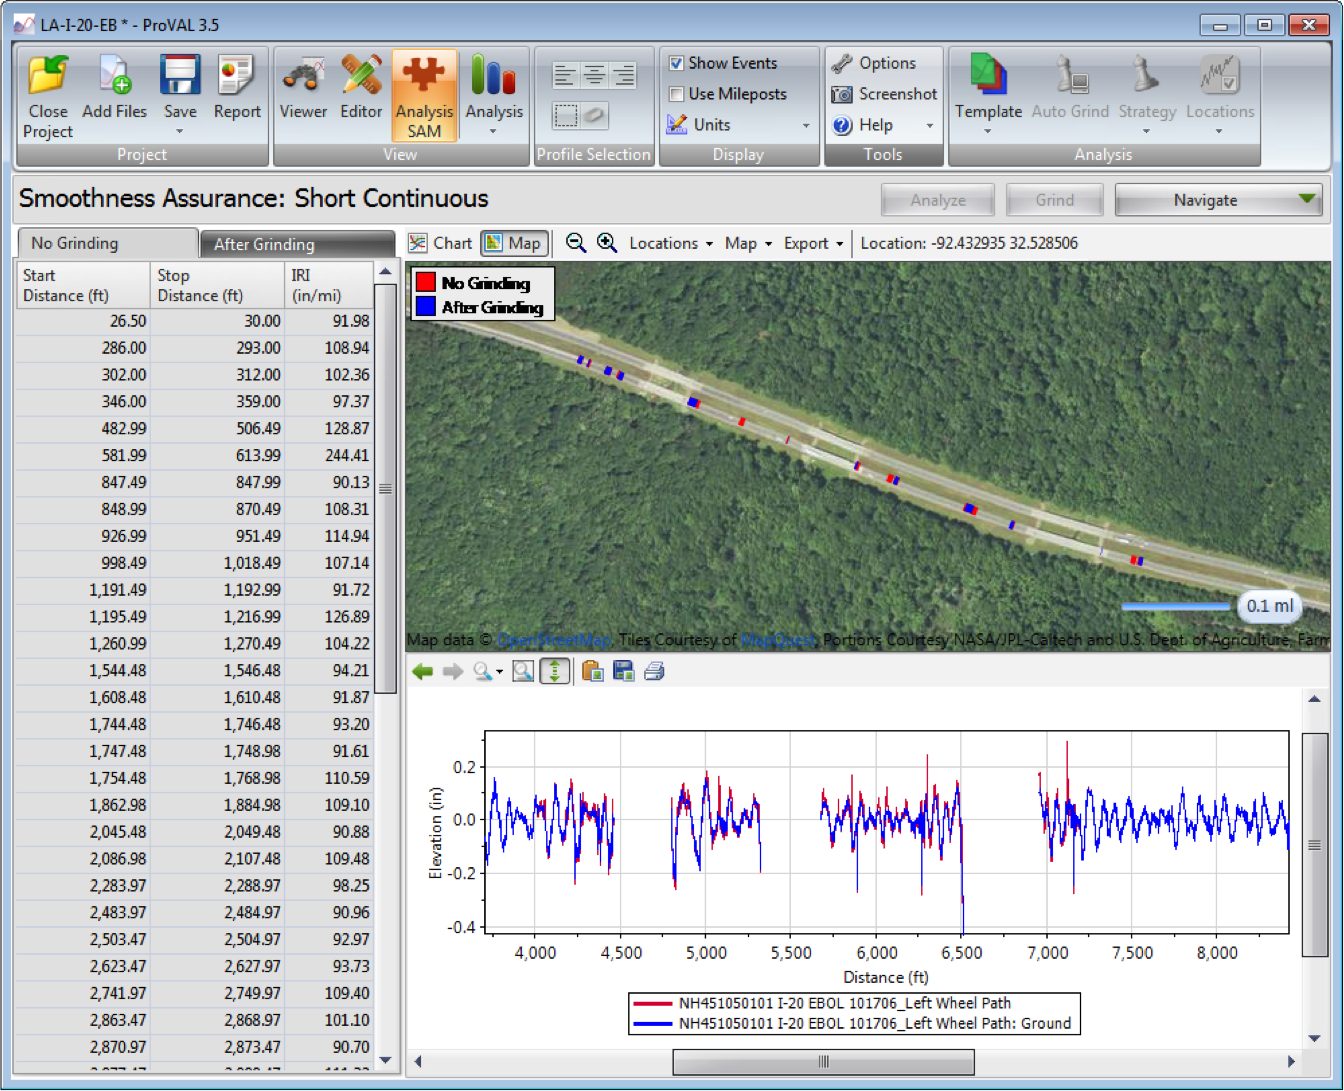 ProVAL 3.5, a pavement profile viewing and analysis tool, displays the results of a pavement smoothness analysis on an aerial map.